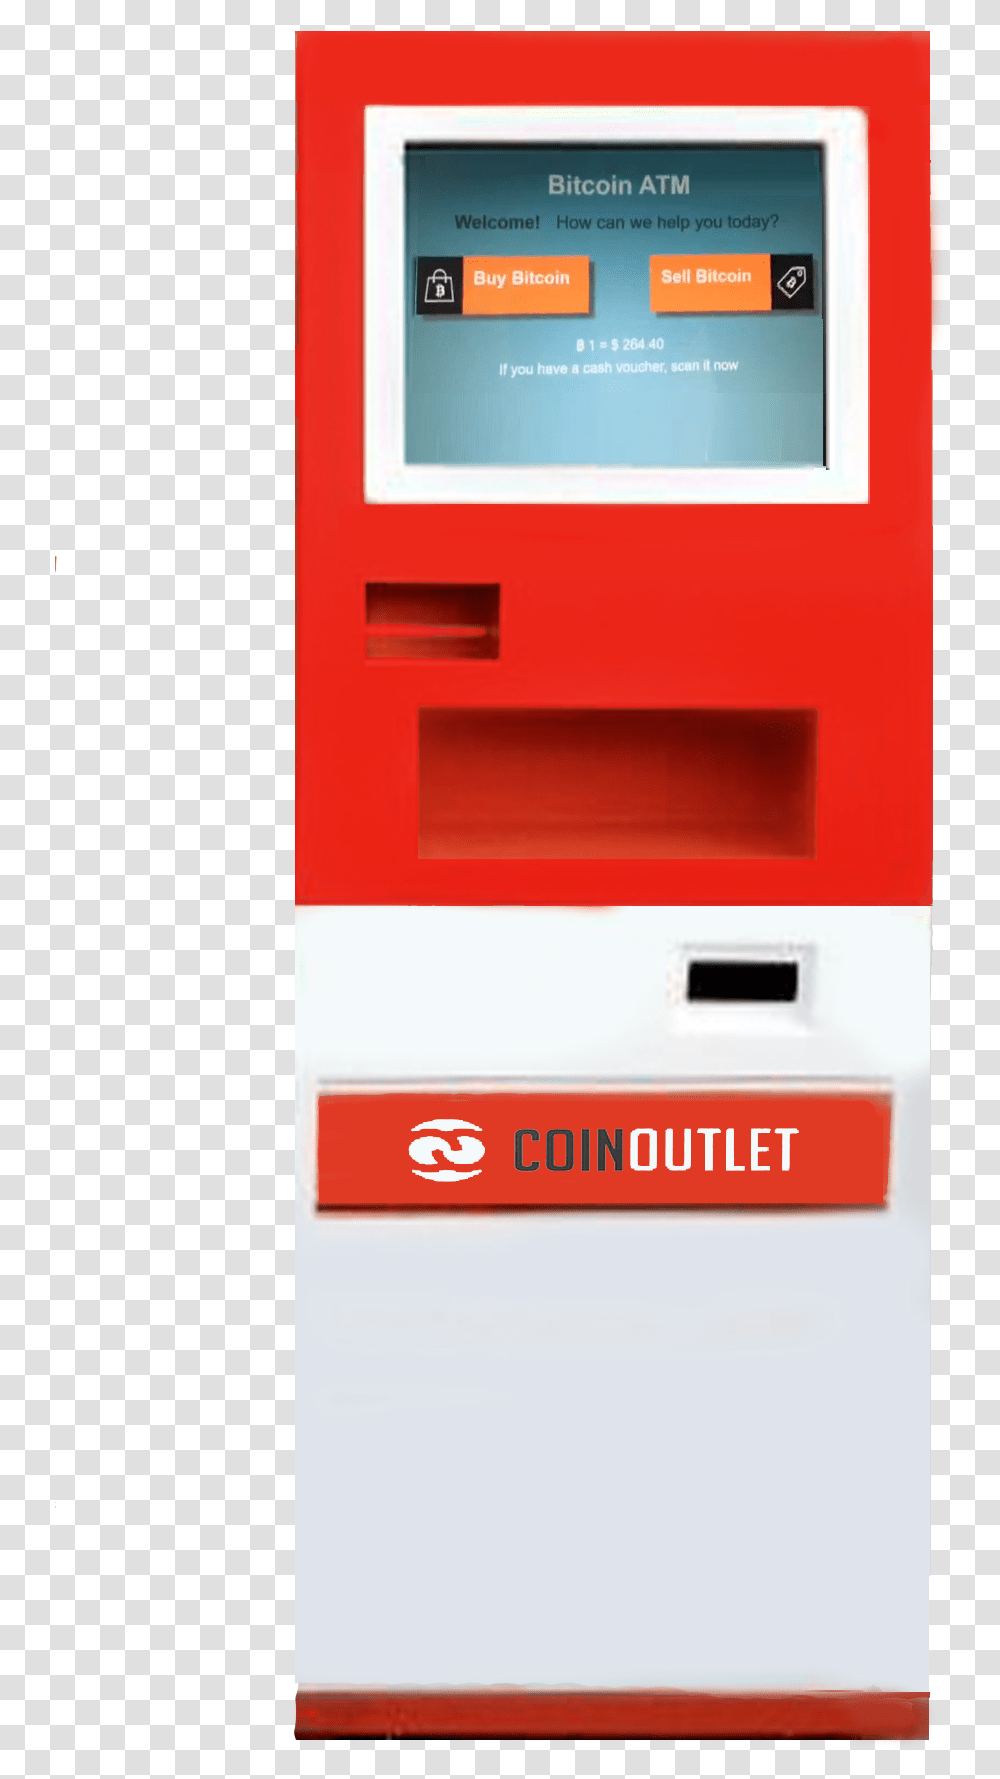 Bitcoin Atm Manufacturer Coinoutlet Automated Teller Machine, Mailbox, Letterbox, Kiosk, Postbox Transparent Png